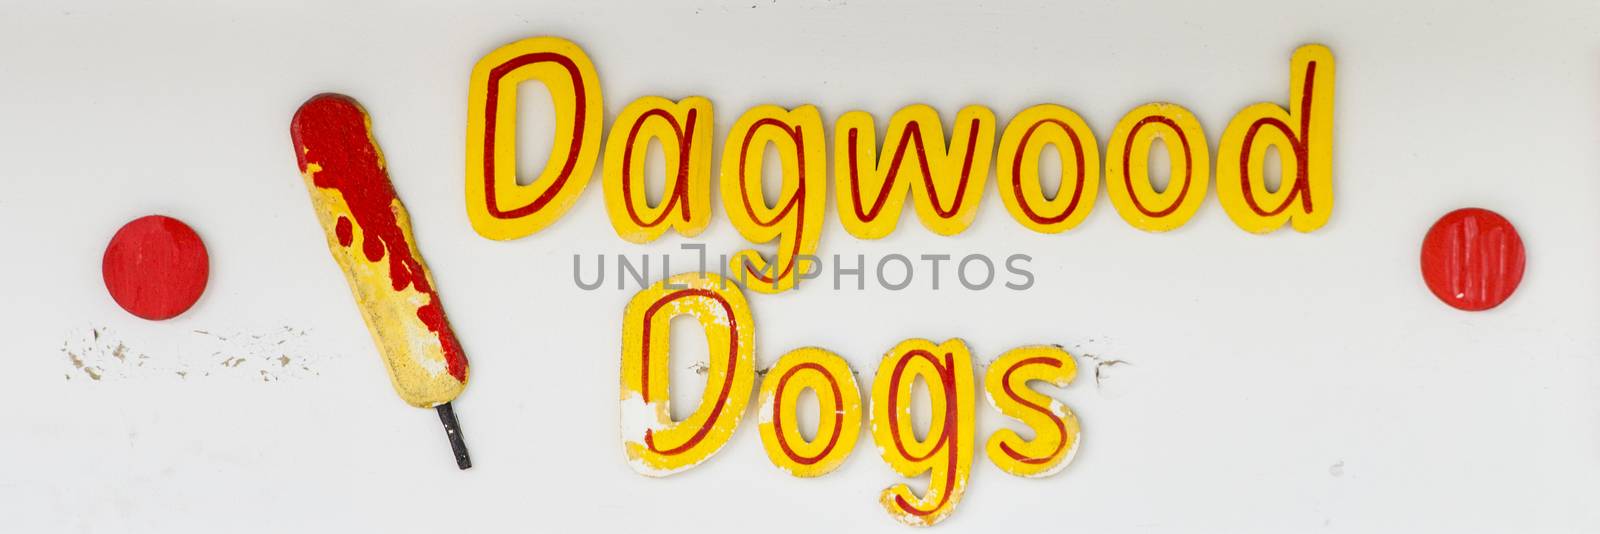 Sign at a Carnival kiosk advertising Dagwood Dogs